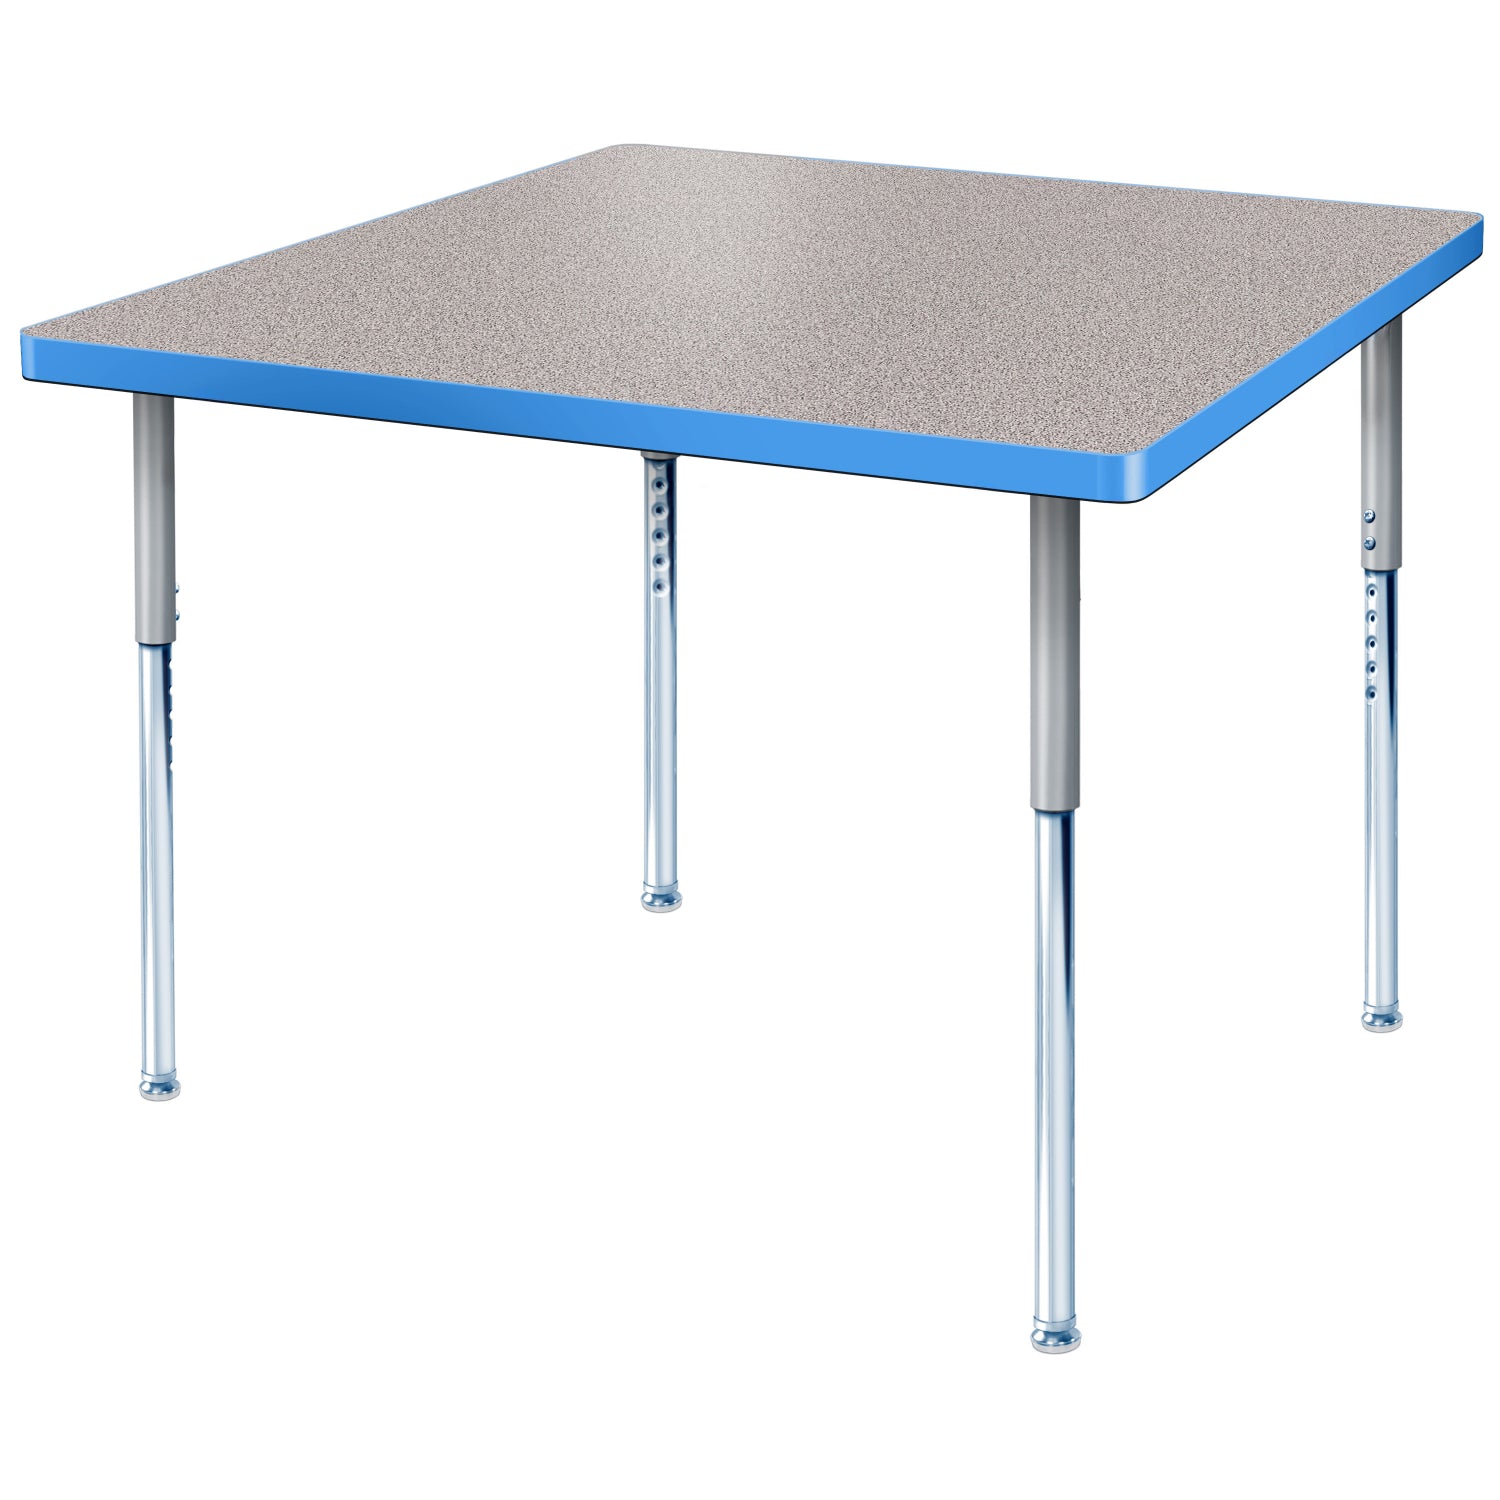 Modern Classic Series 48 x 48" Square Activity Table with High Pressure Laminate Top, Adjustable Height Legs